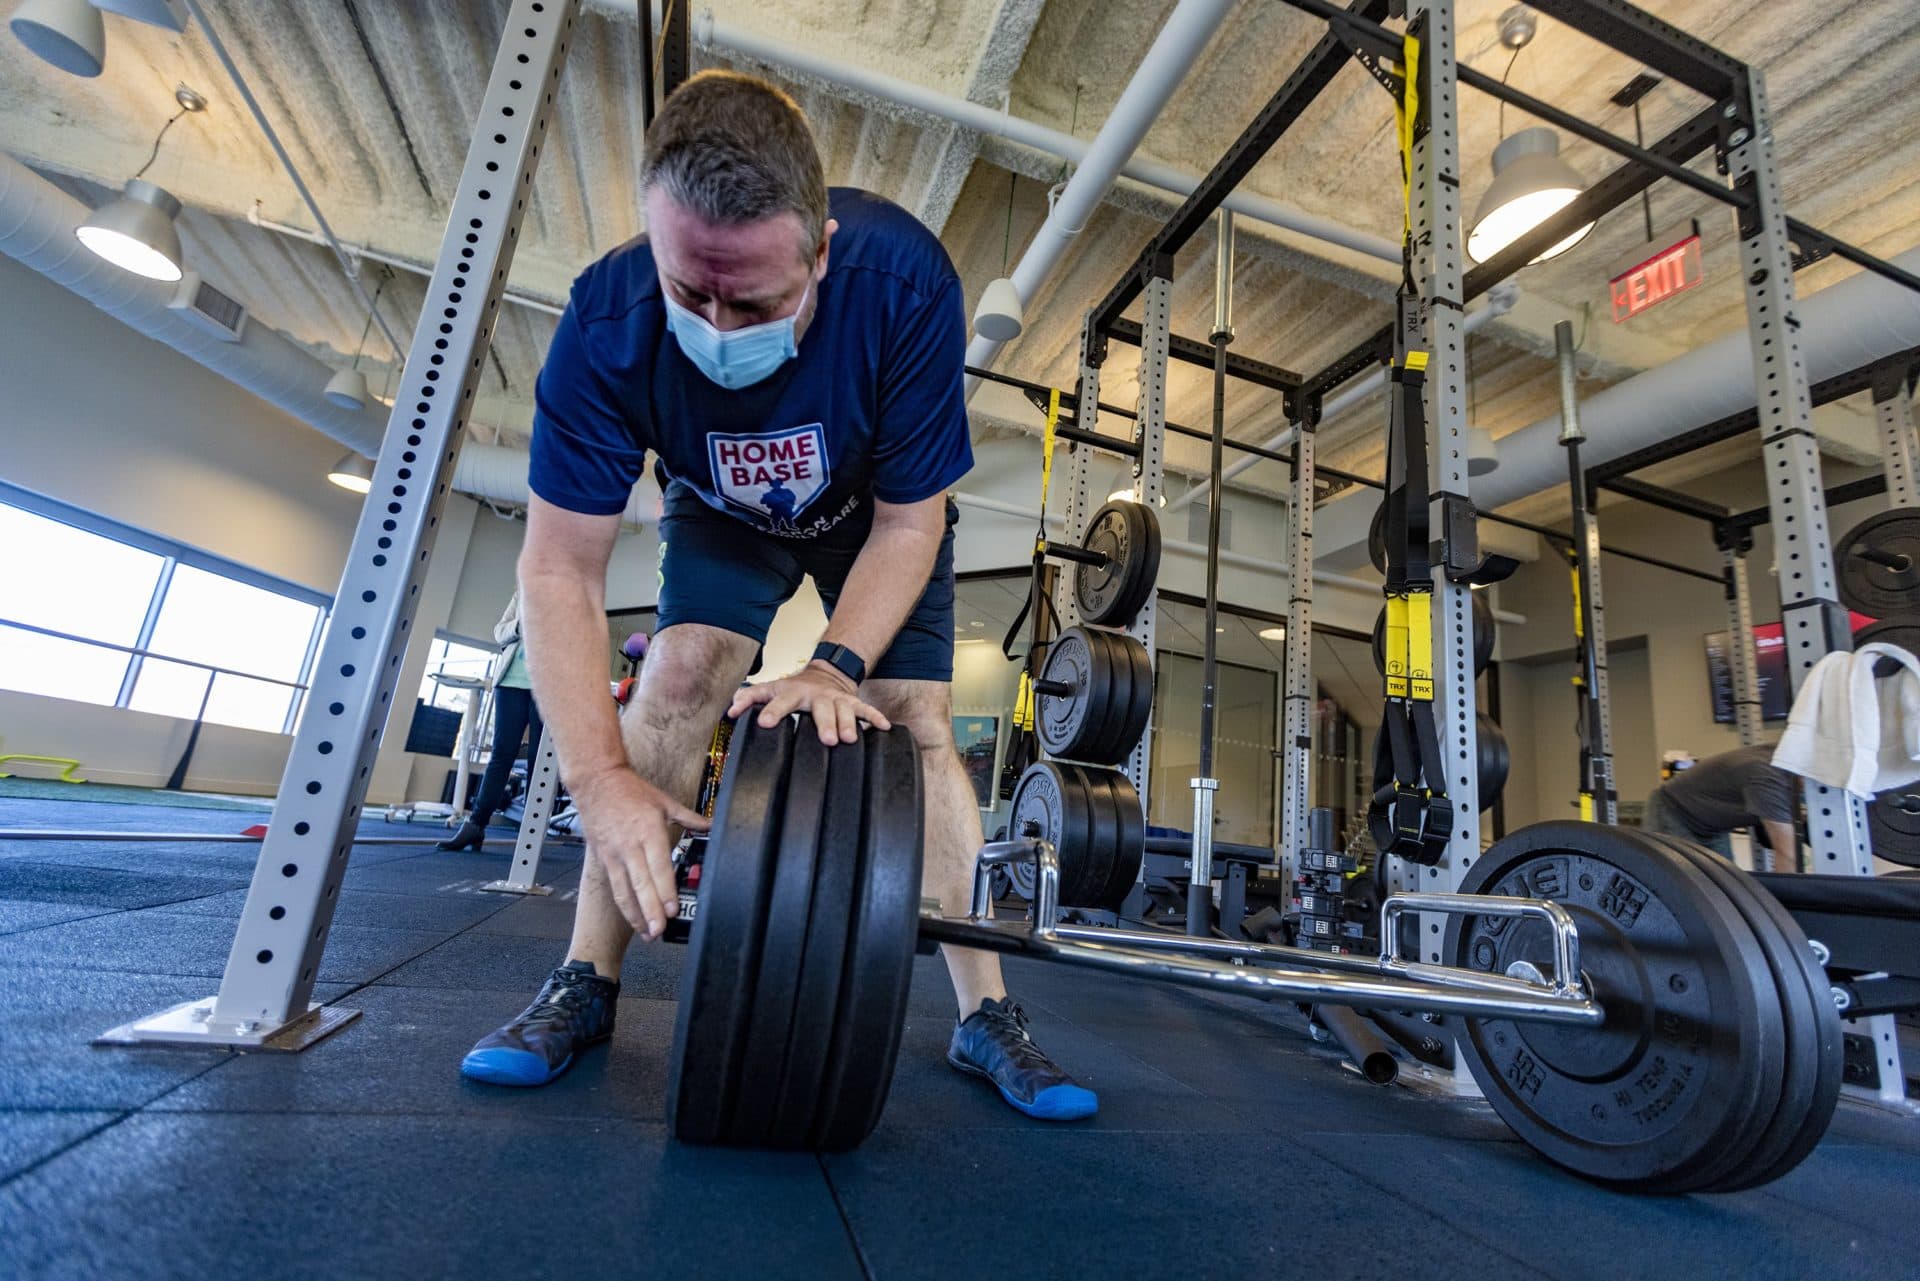 James Knauer adds more weigh to the weight bar in the gym at Home Base in Charlestown. (Jesse Costa/WBUR)